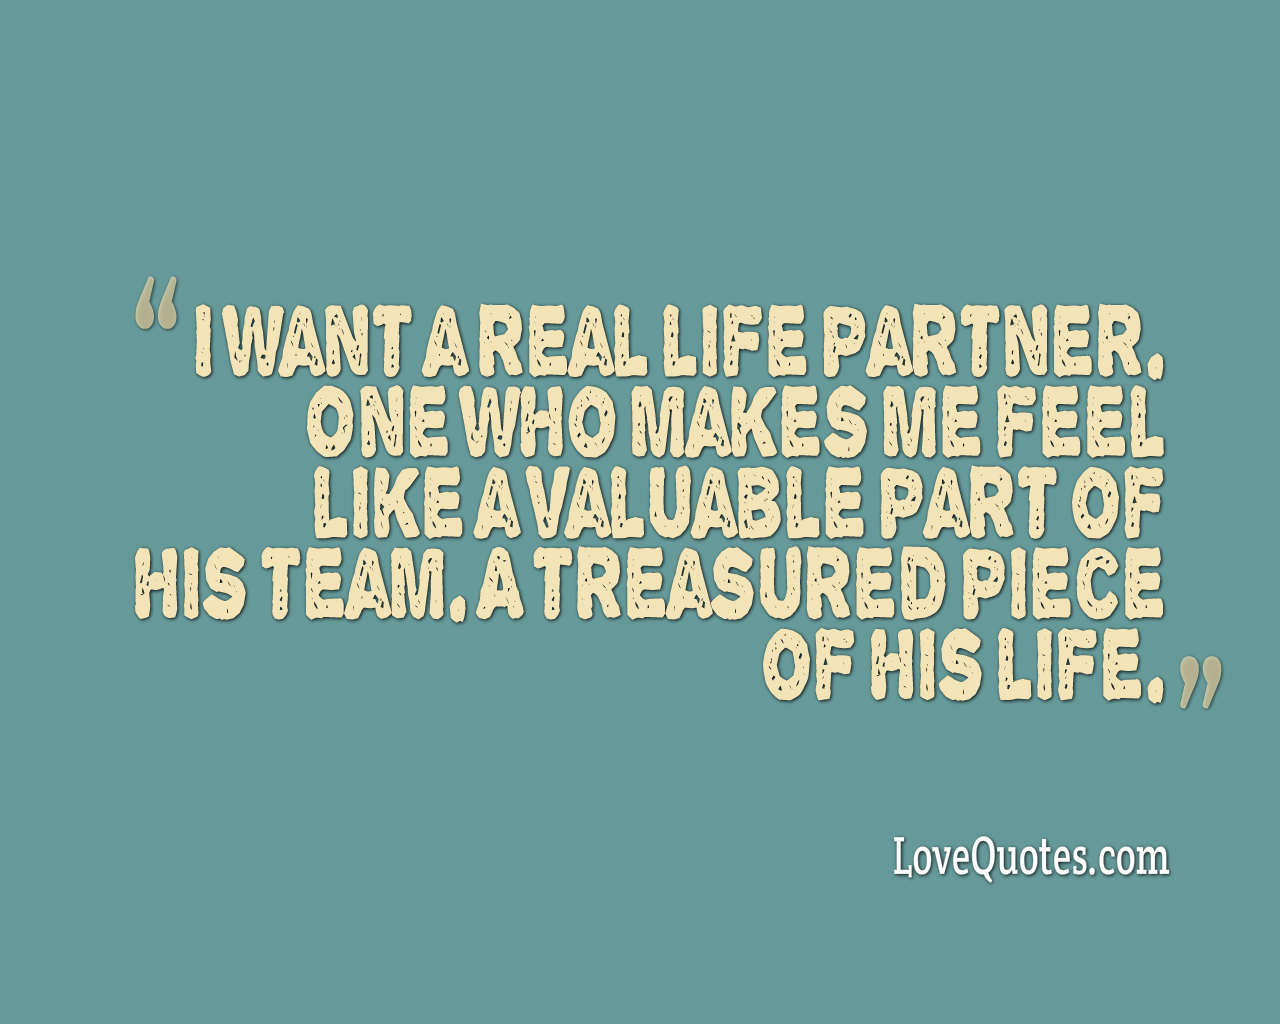 Looking for life partner quotes